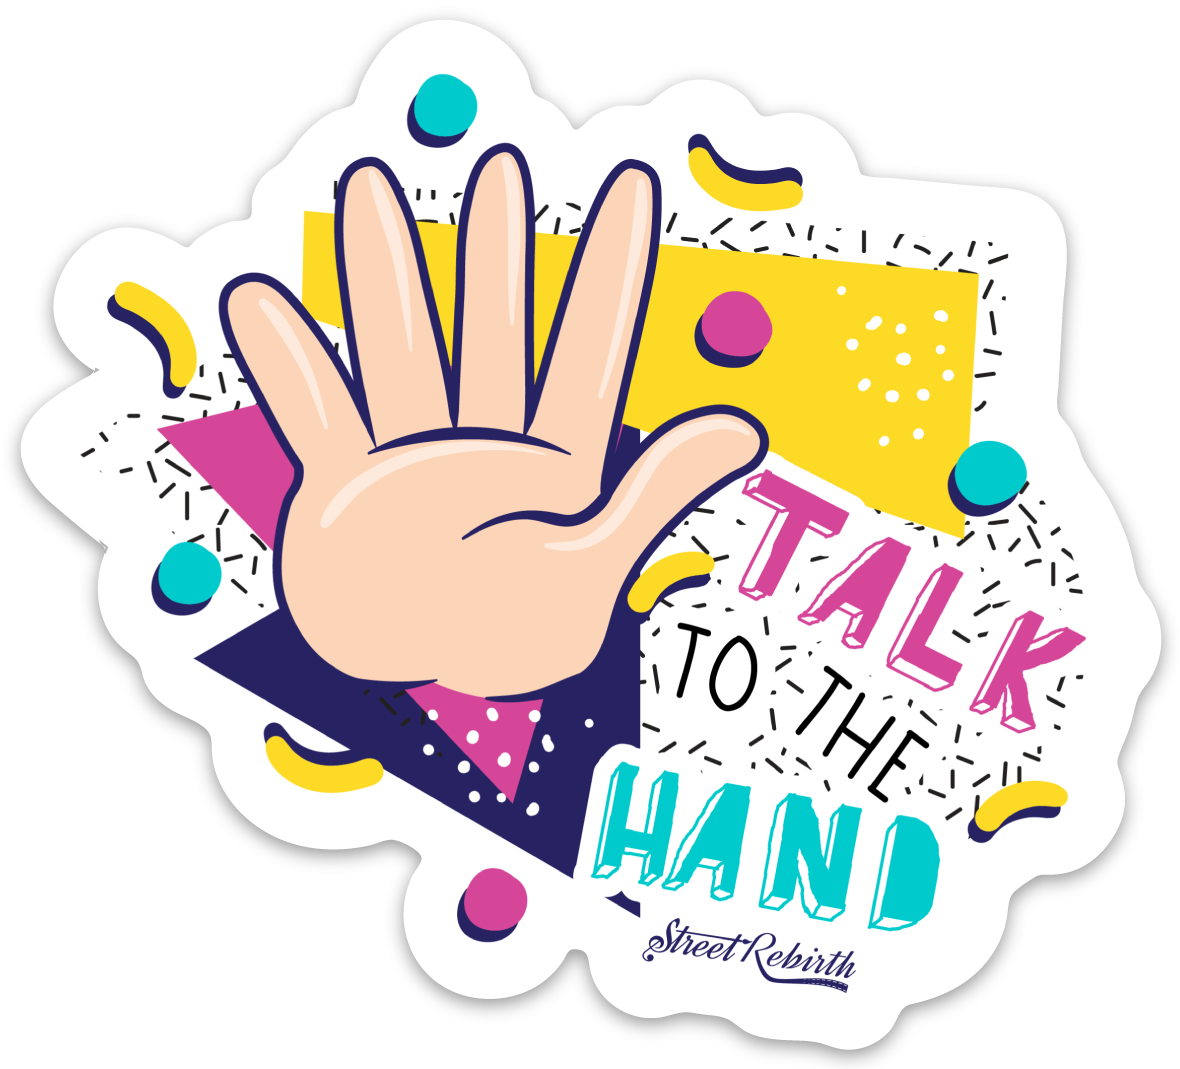 Talk To The Hand PUN STICKER – ONE 4 INCH WATER PROOF VINYL STICKER – FOR HYDRO FLASK, SKATEBOARD, LAPTOP, PLANNER, CAR, COLLECTING, GIFTING